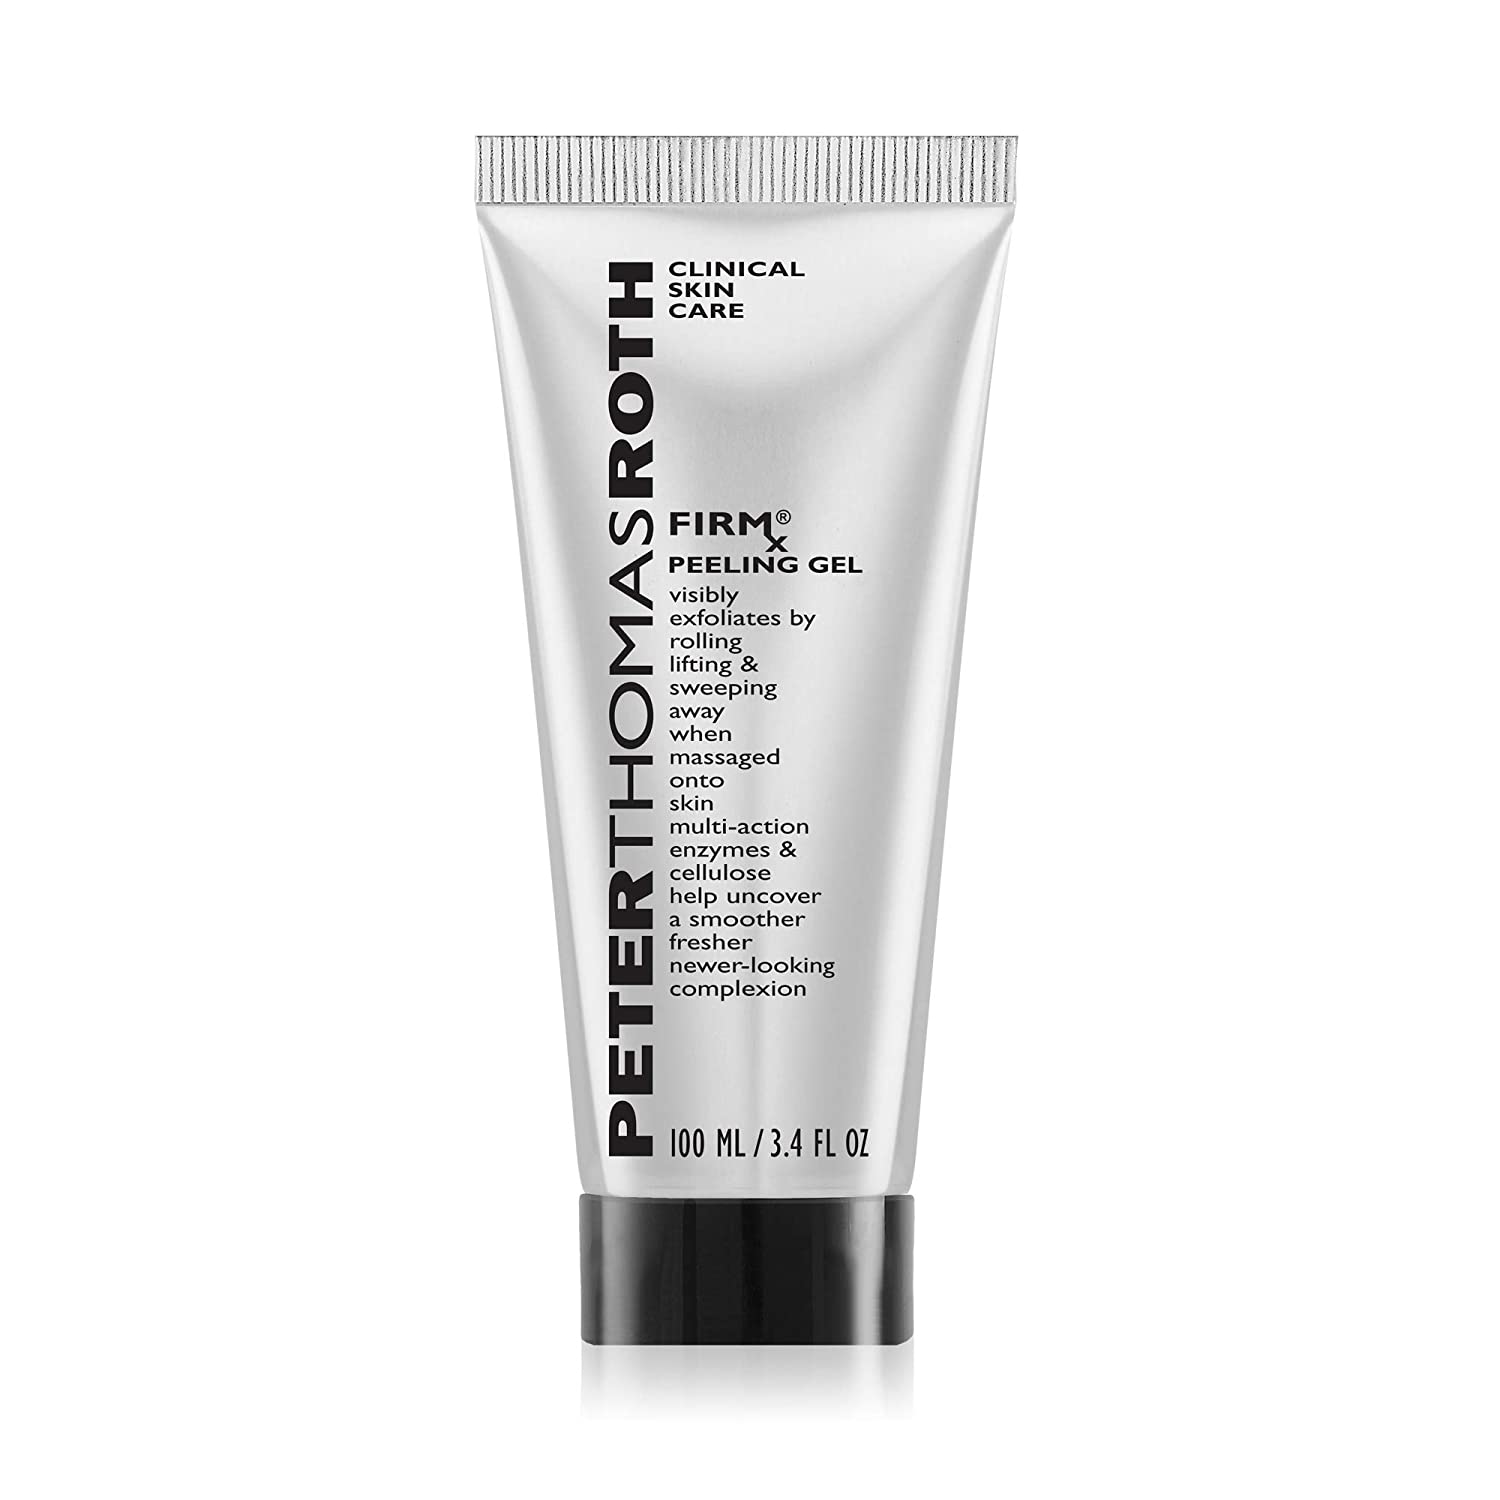 Peter Thomas Roth FIRMx Peeling Gel, Exfoliant for Dry and Flaky Skin 3.4 Fl Oz